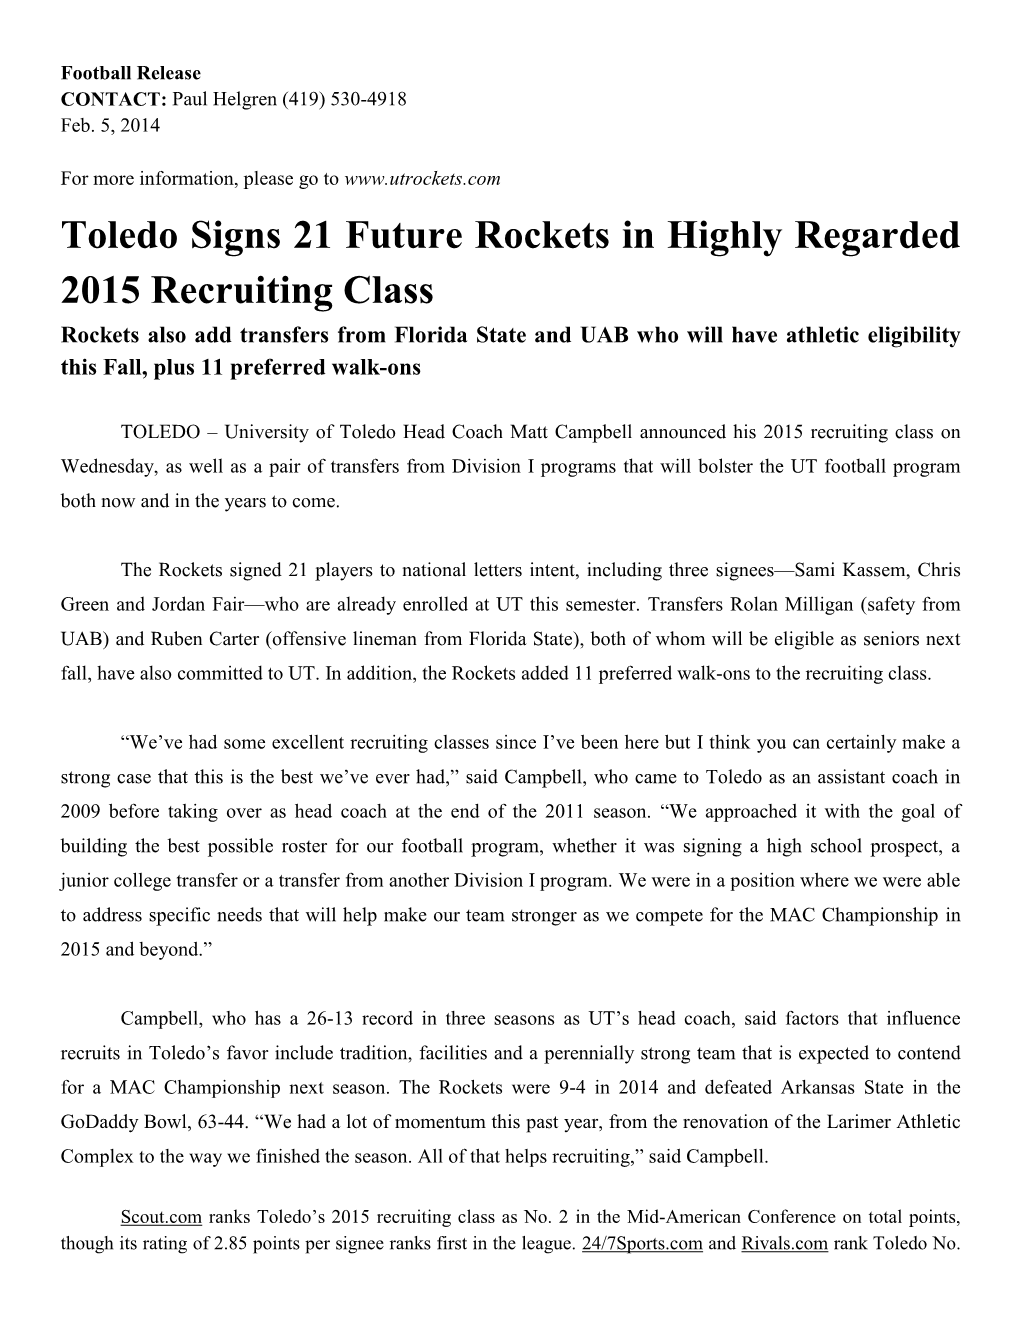 Toledo Signs 21 Future Rockets in Highly Regarded 2015 Recruiting